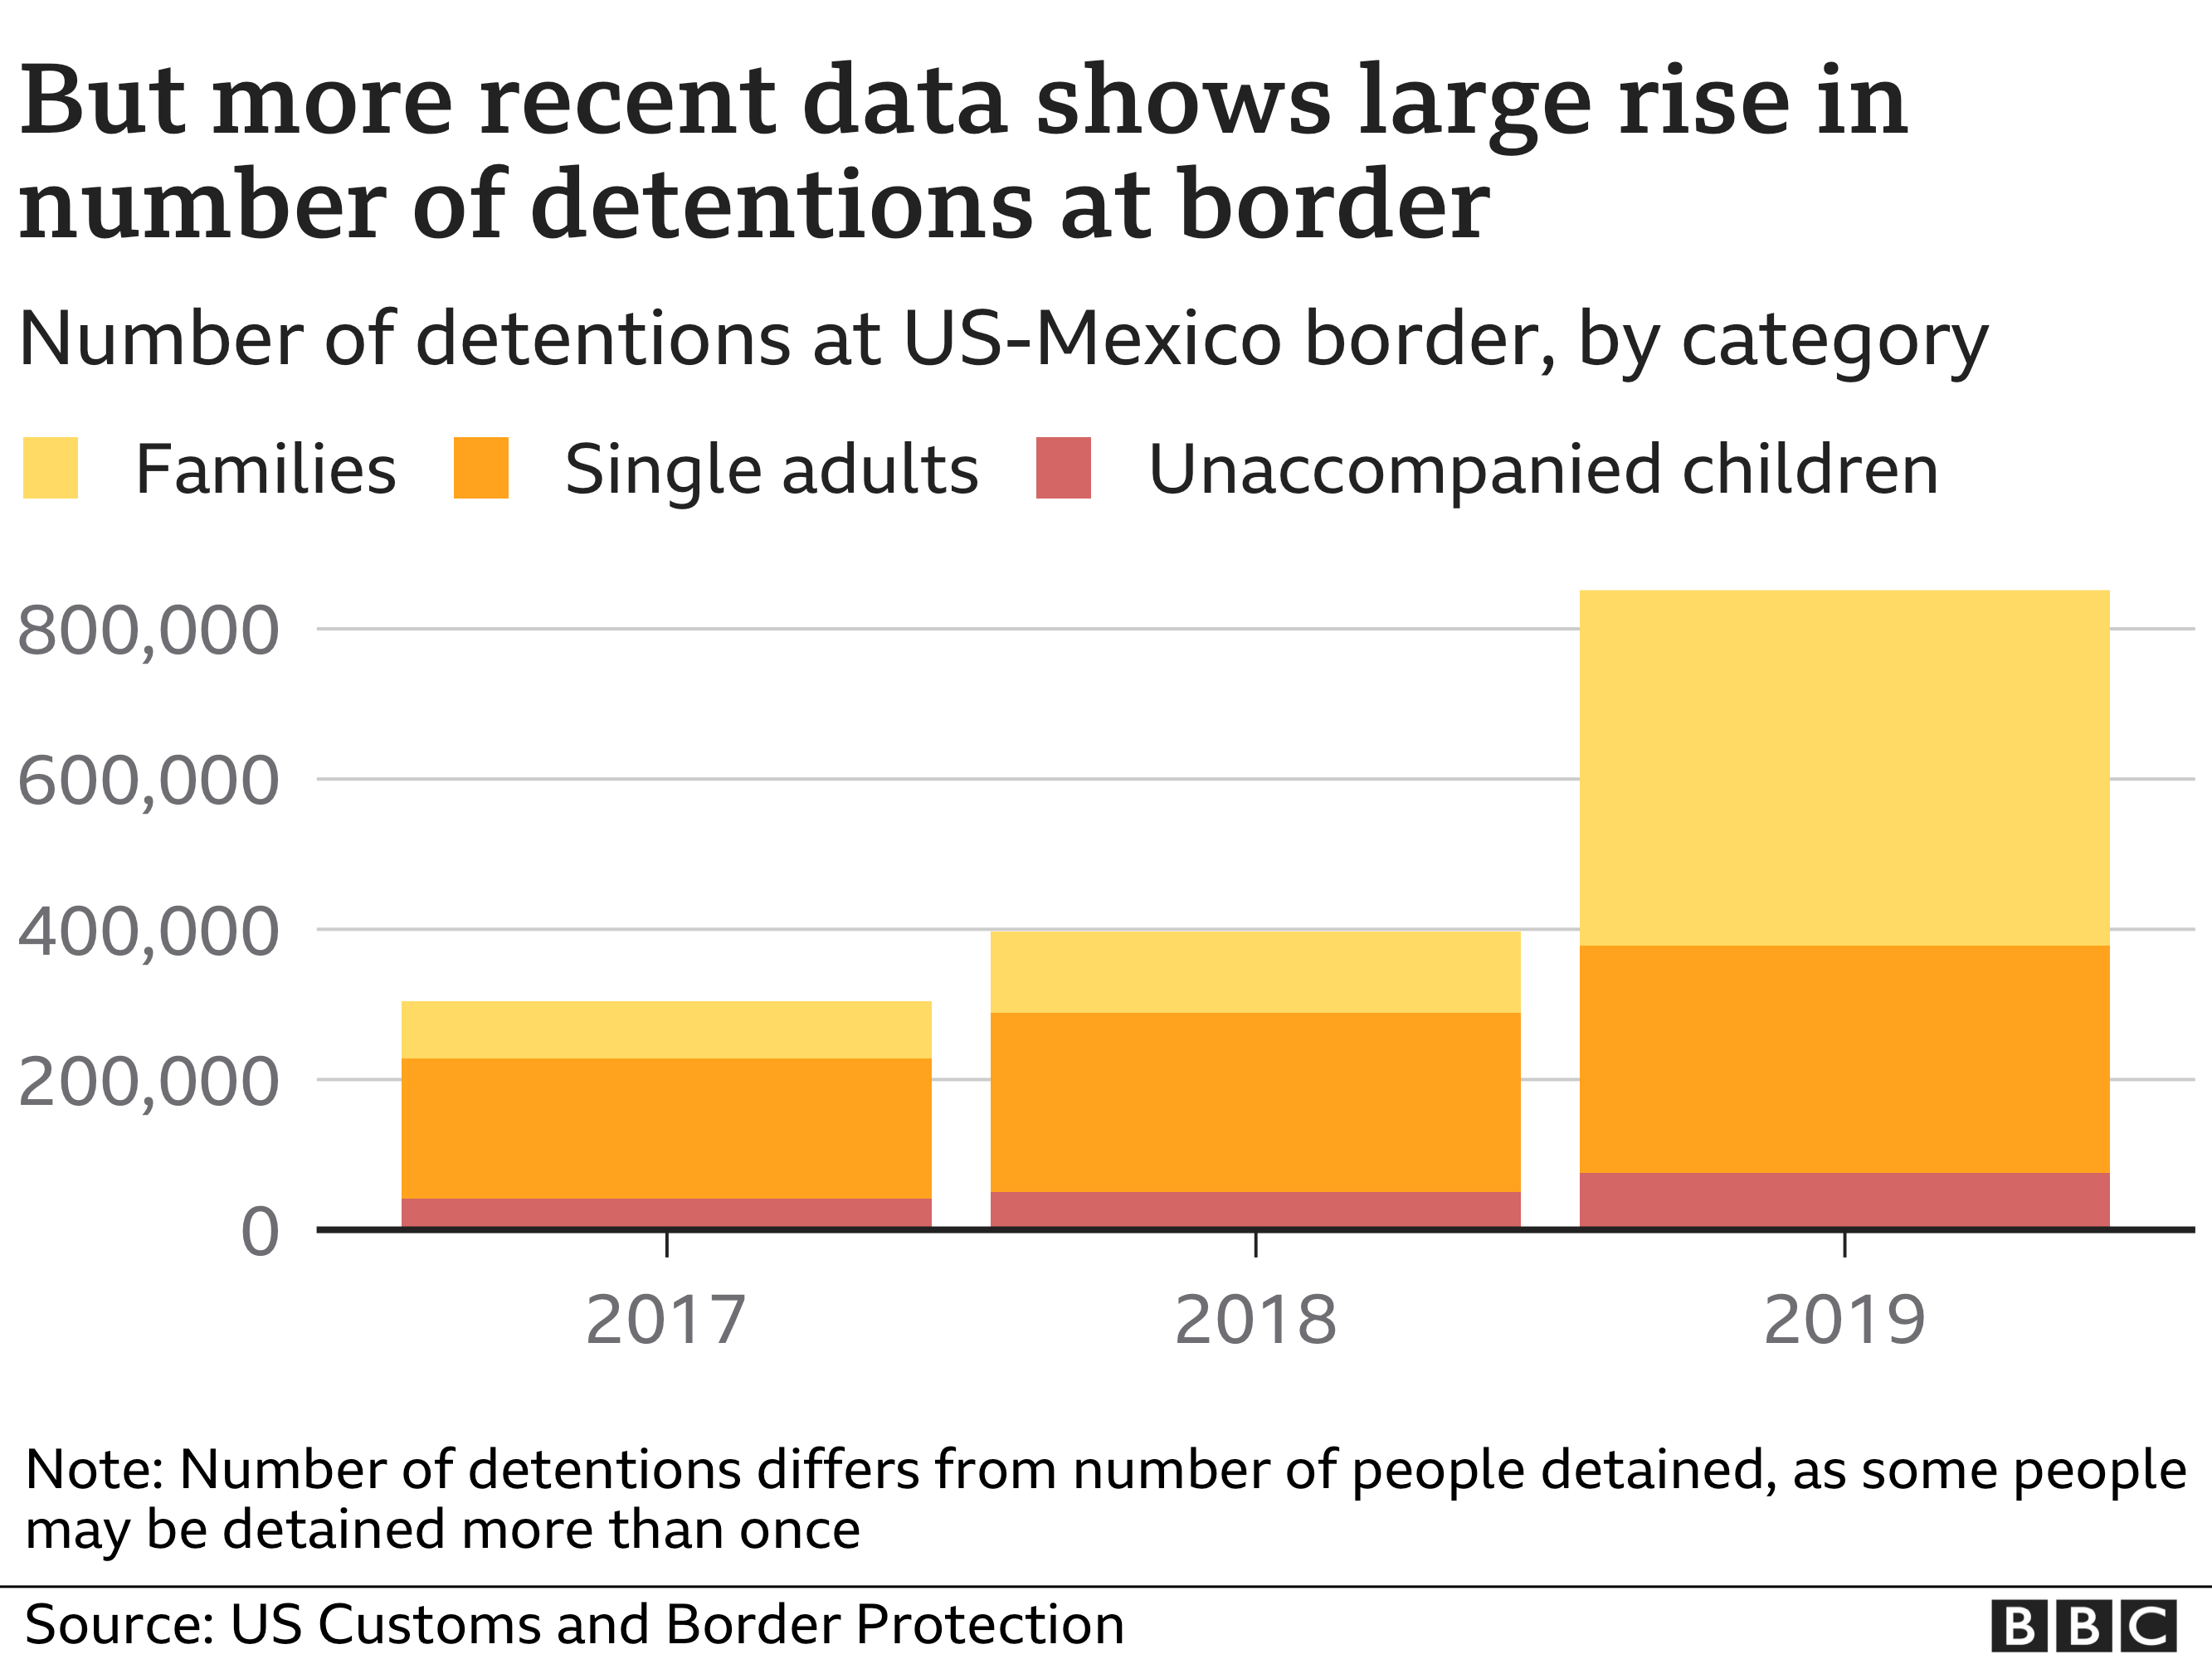 But more recent data shows large rise in number of detentions at border